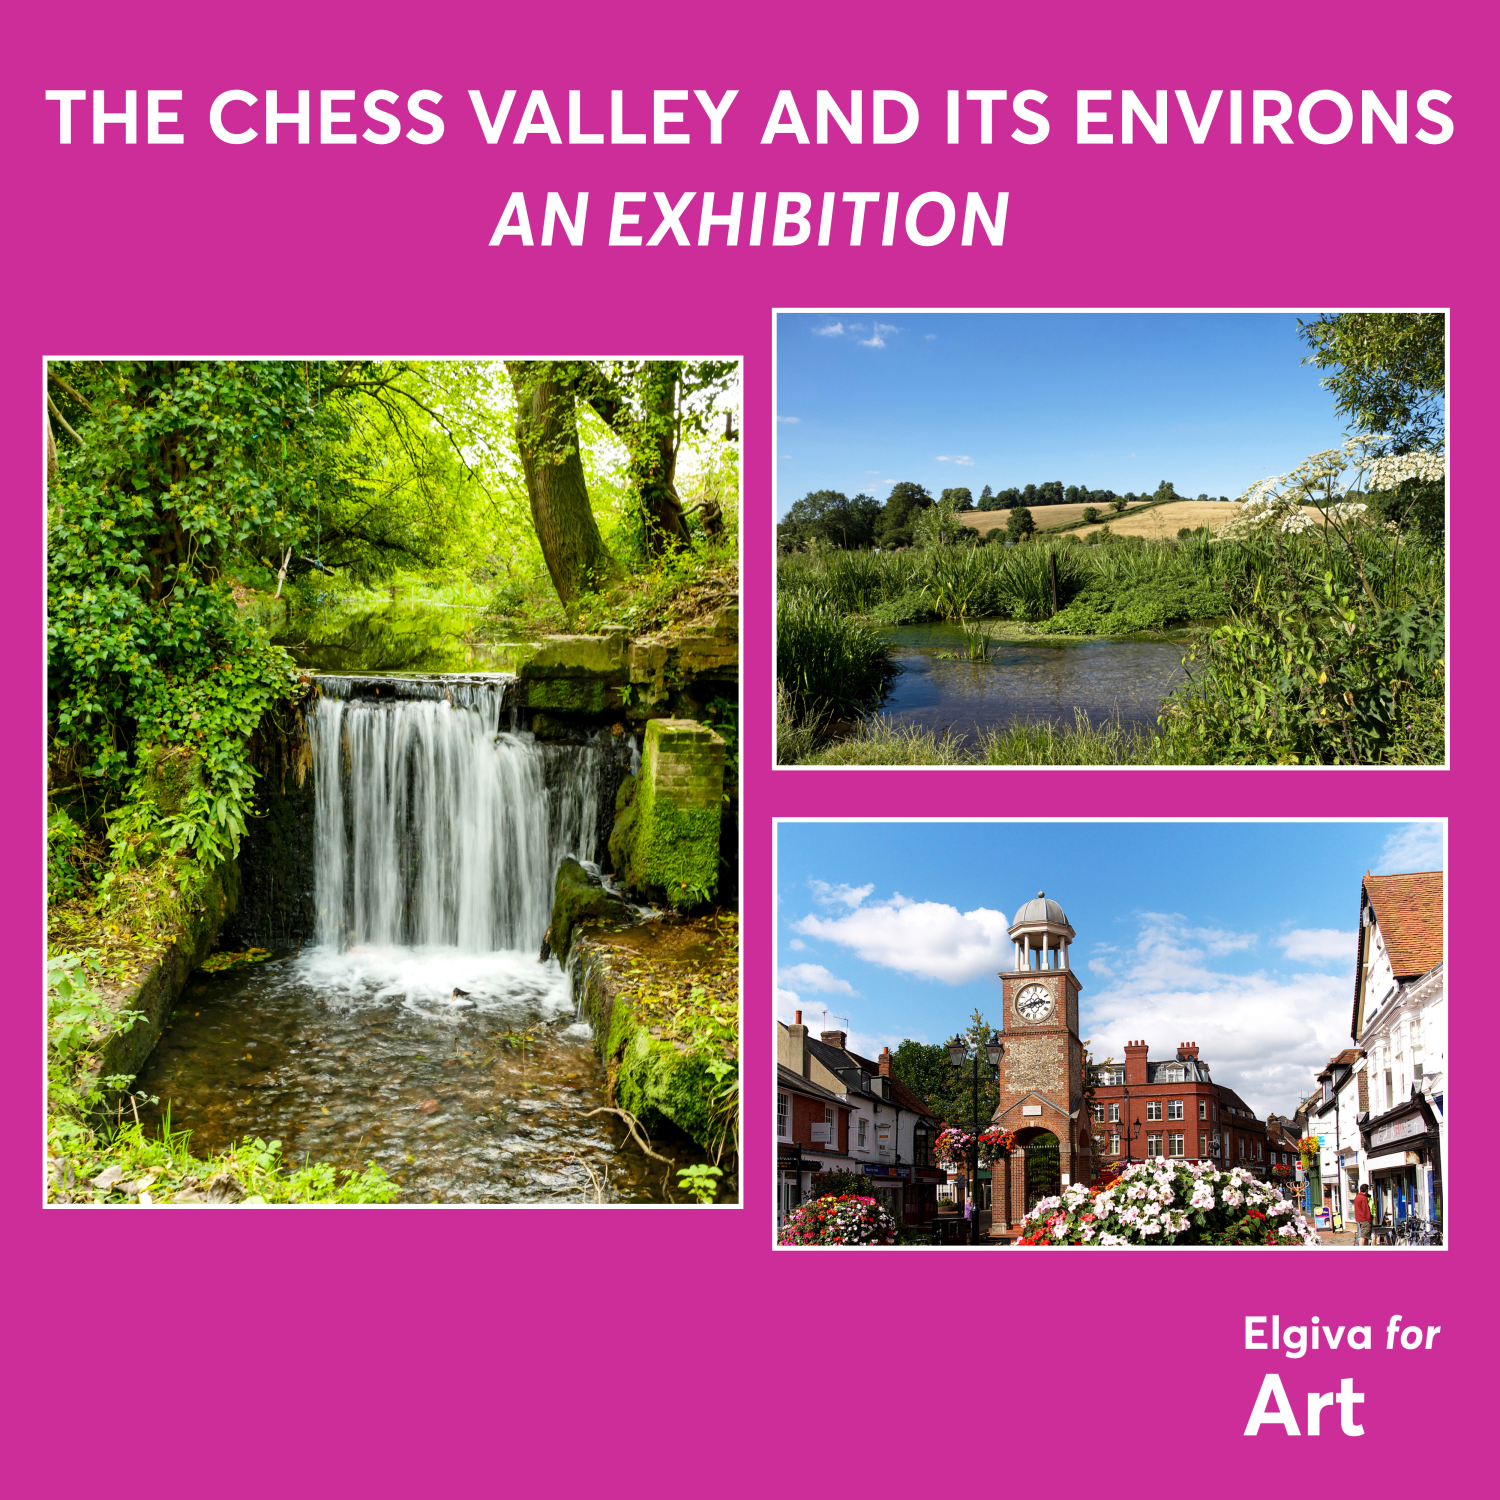 THE CHESS VALLEY AND ITS ENVIRONS AN EXHIBITION